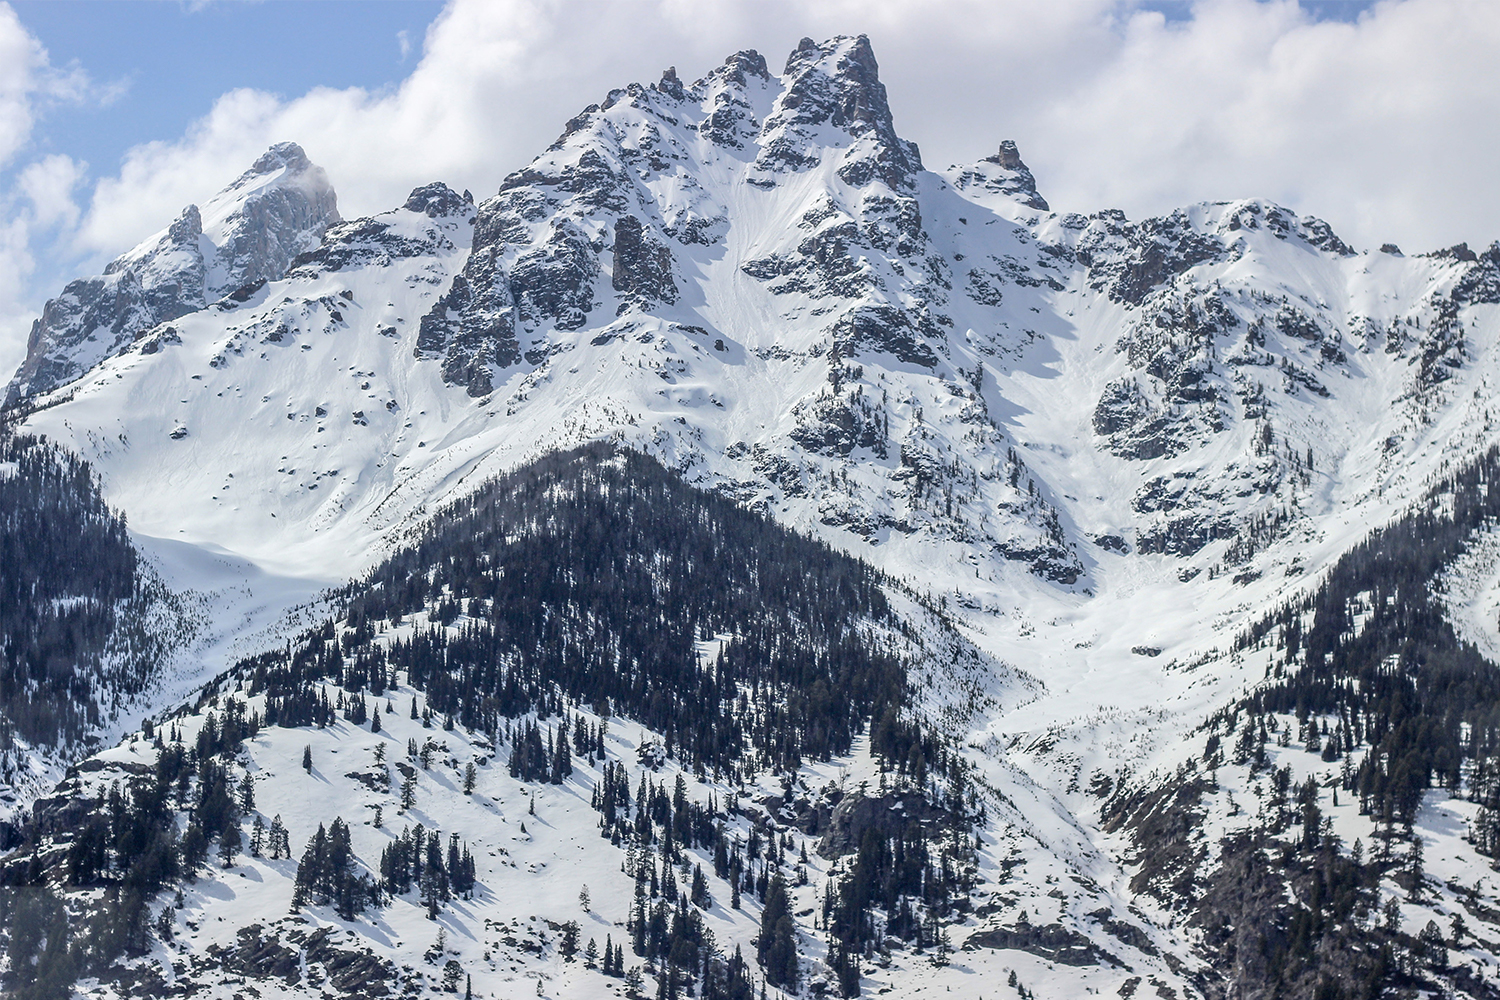 A snow-capped mountain peak of the Teton mountain range with a blue sky and white clouds above